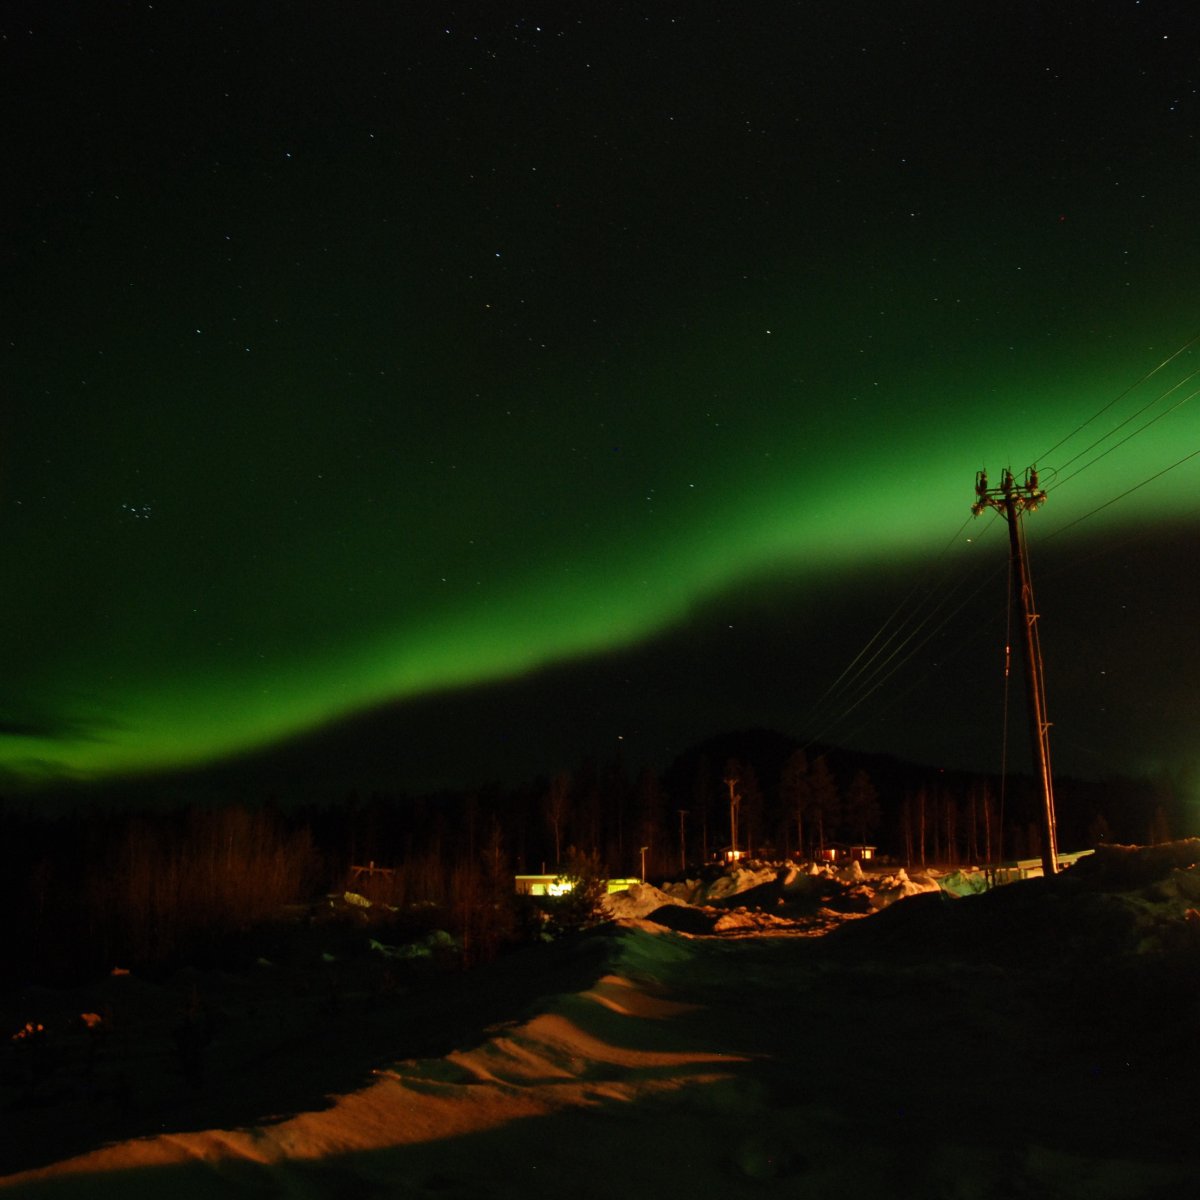 Northern lights pictures in winter